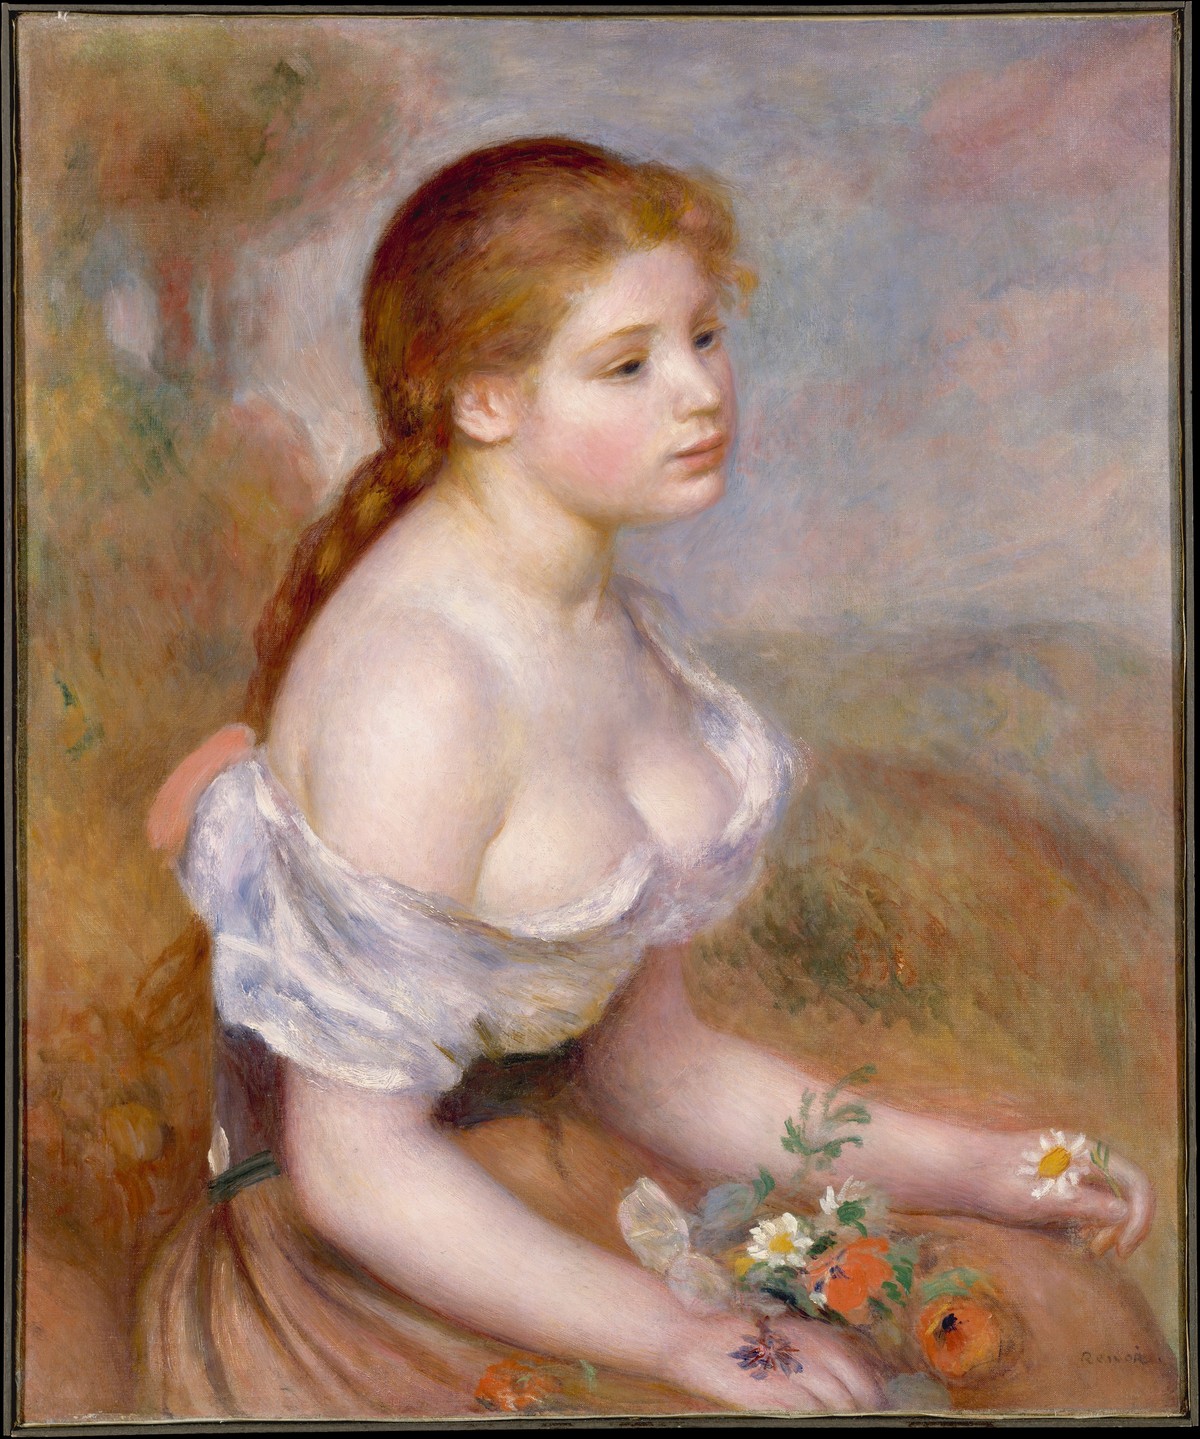 A Young Girl with Daisies / Auguste Renoir / 1889